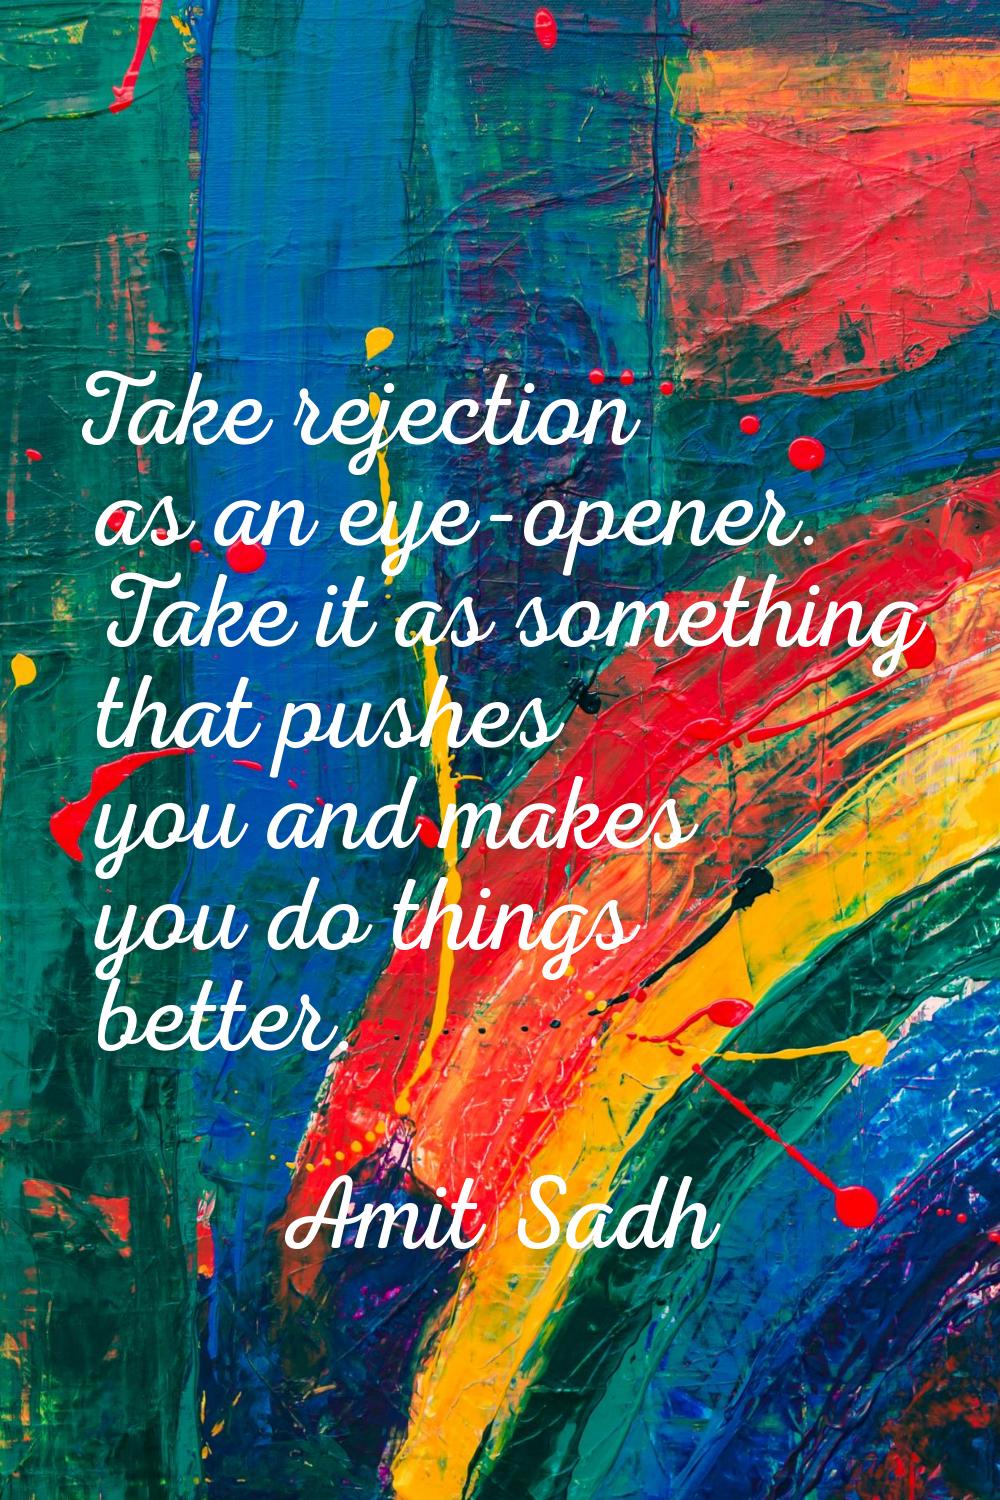 Take rejection as an eye-opener. Take it as something that pushes you and makes you do things bette